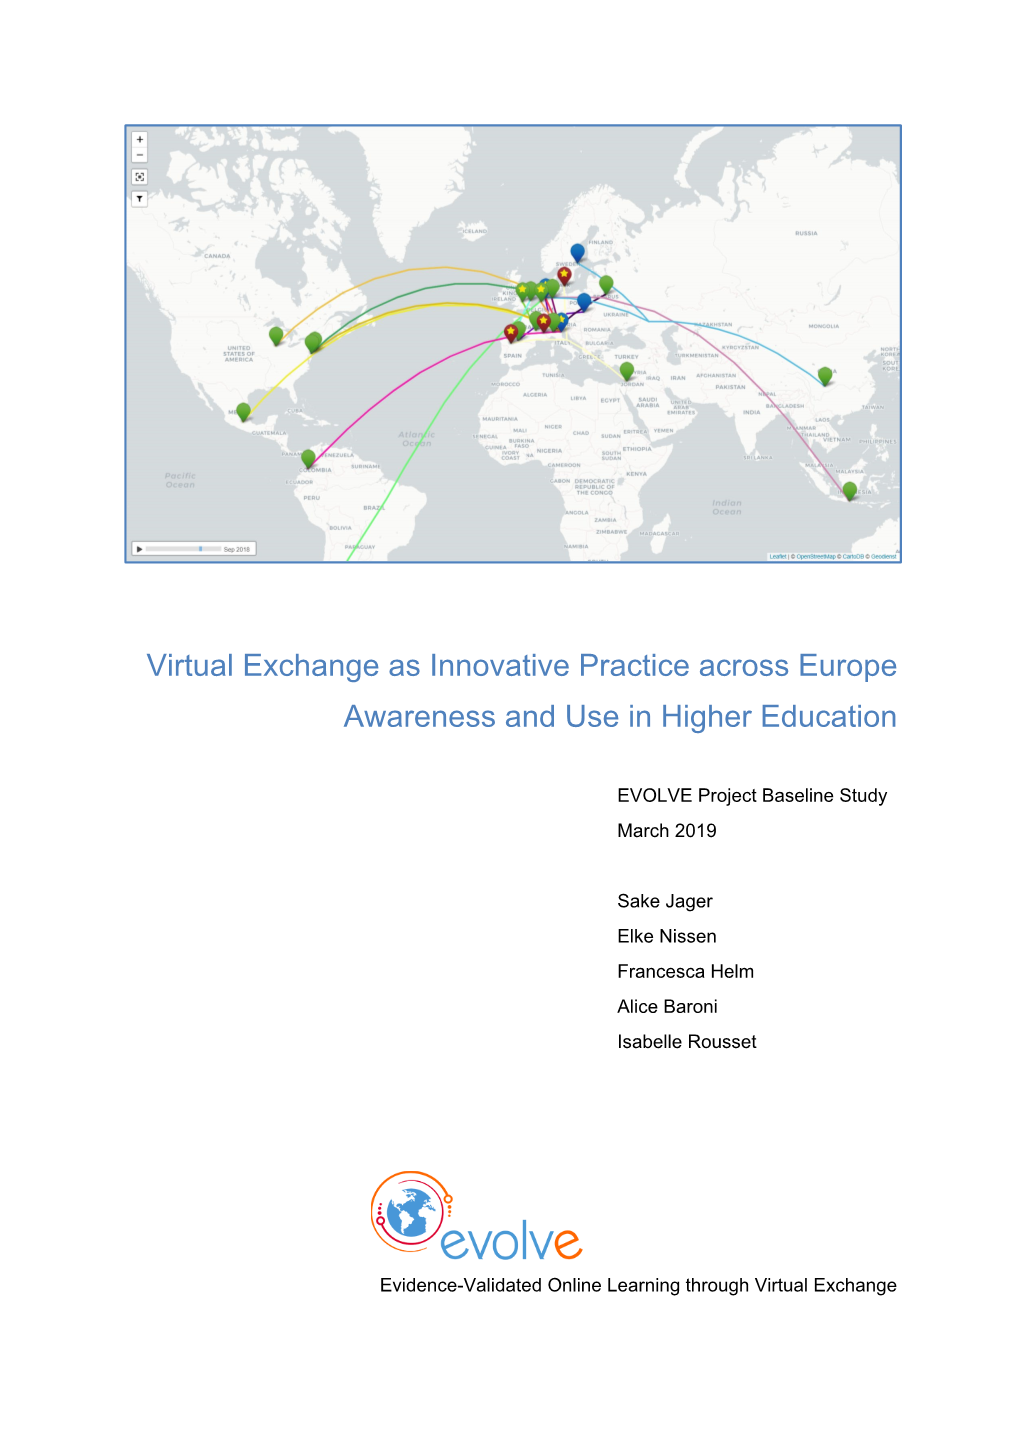 Virtual Exchange As Innovative Practice Across Europe Awareness and Use in Higher Education